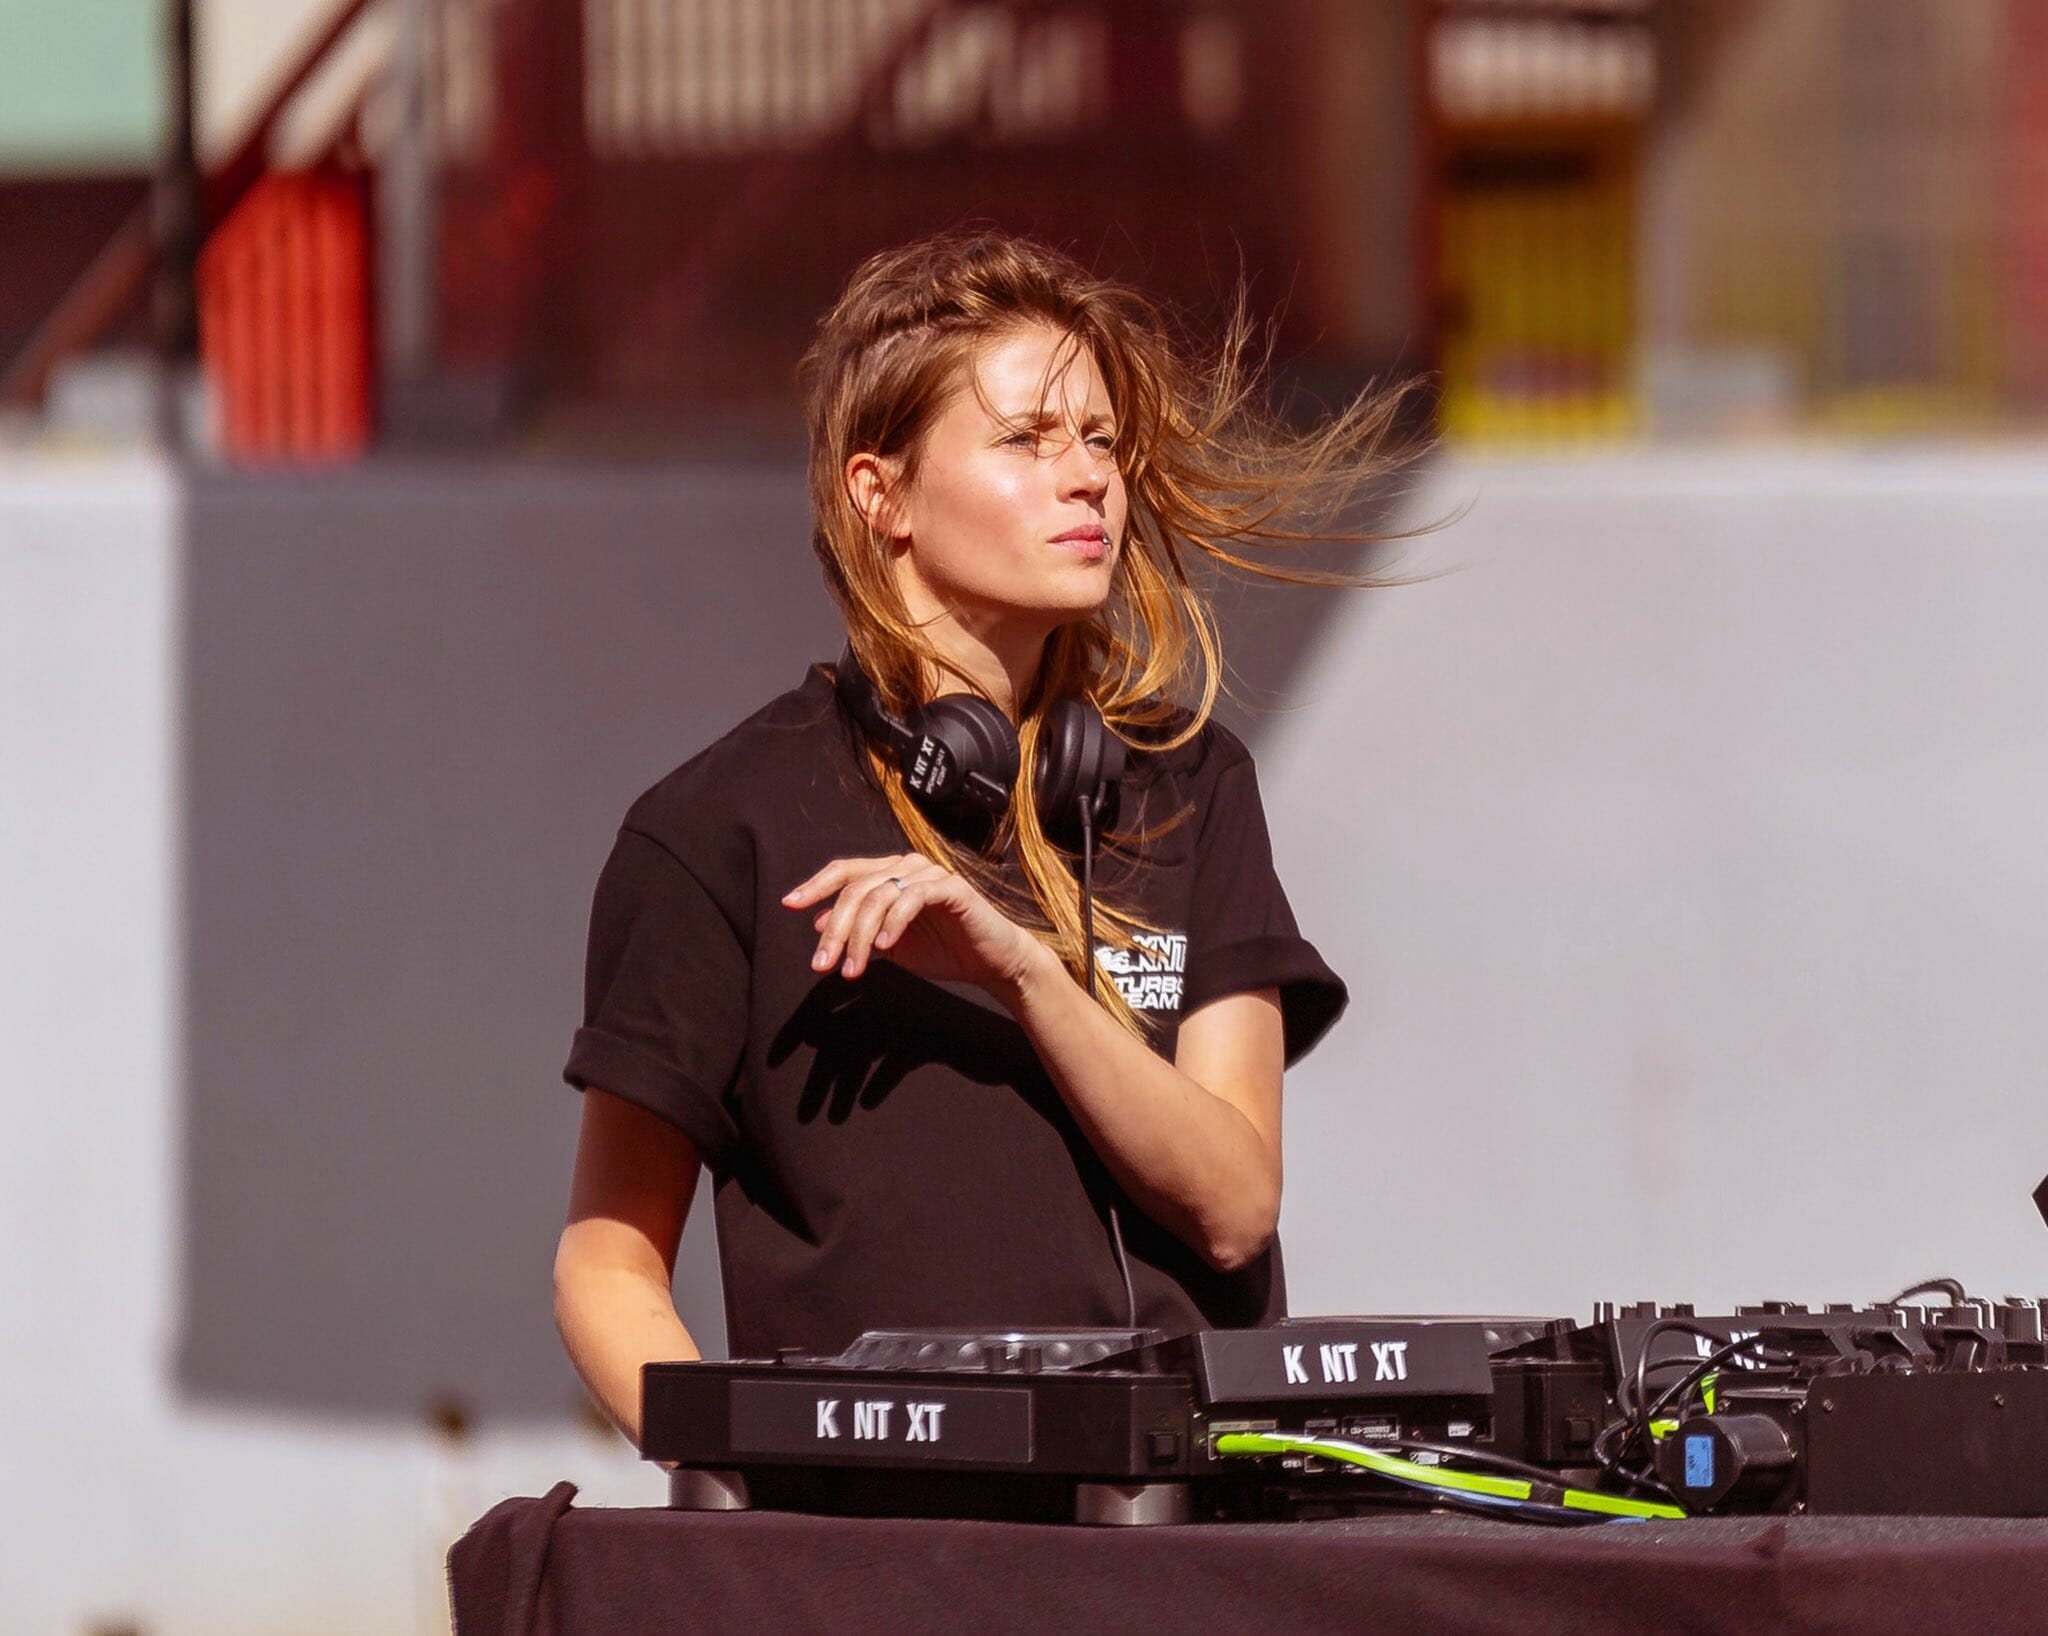 Charlotte de Witte packages 'Formula' EP with live 'New Form' broadcast from Italian racetrack - Dancing Astronaut Charlotte de Witte packages ' Formula' EP with live 'New Form' broadcast from Italian racetrack :